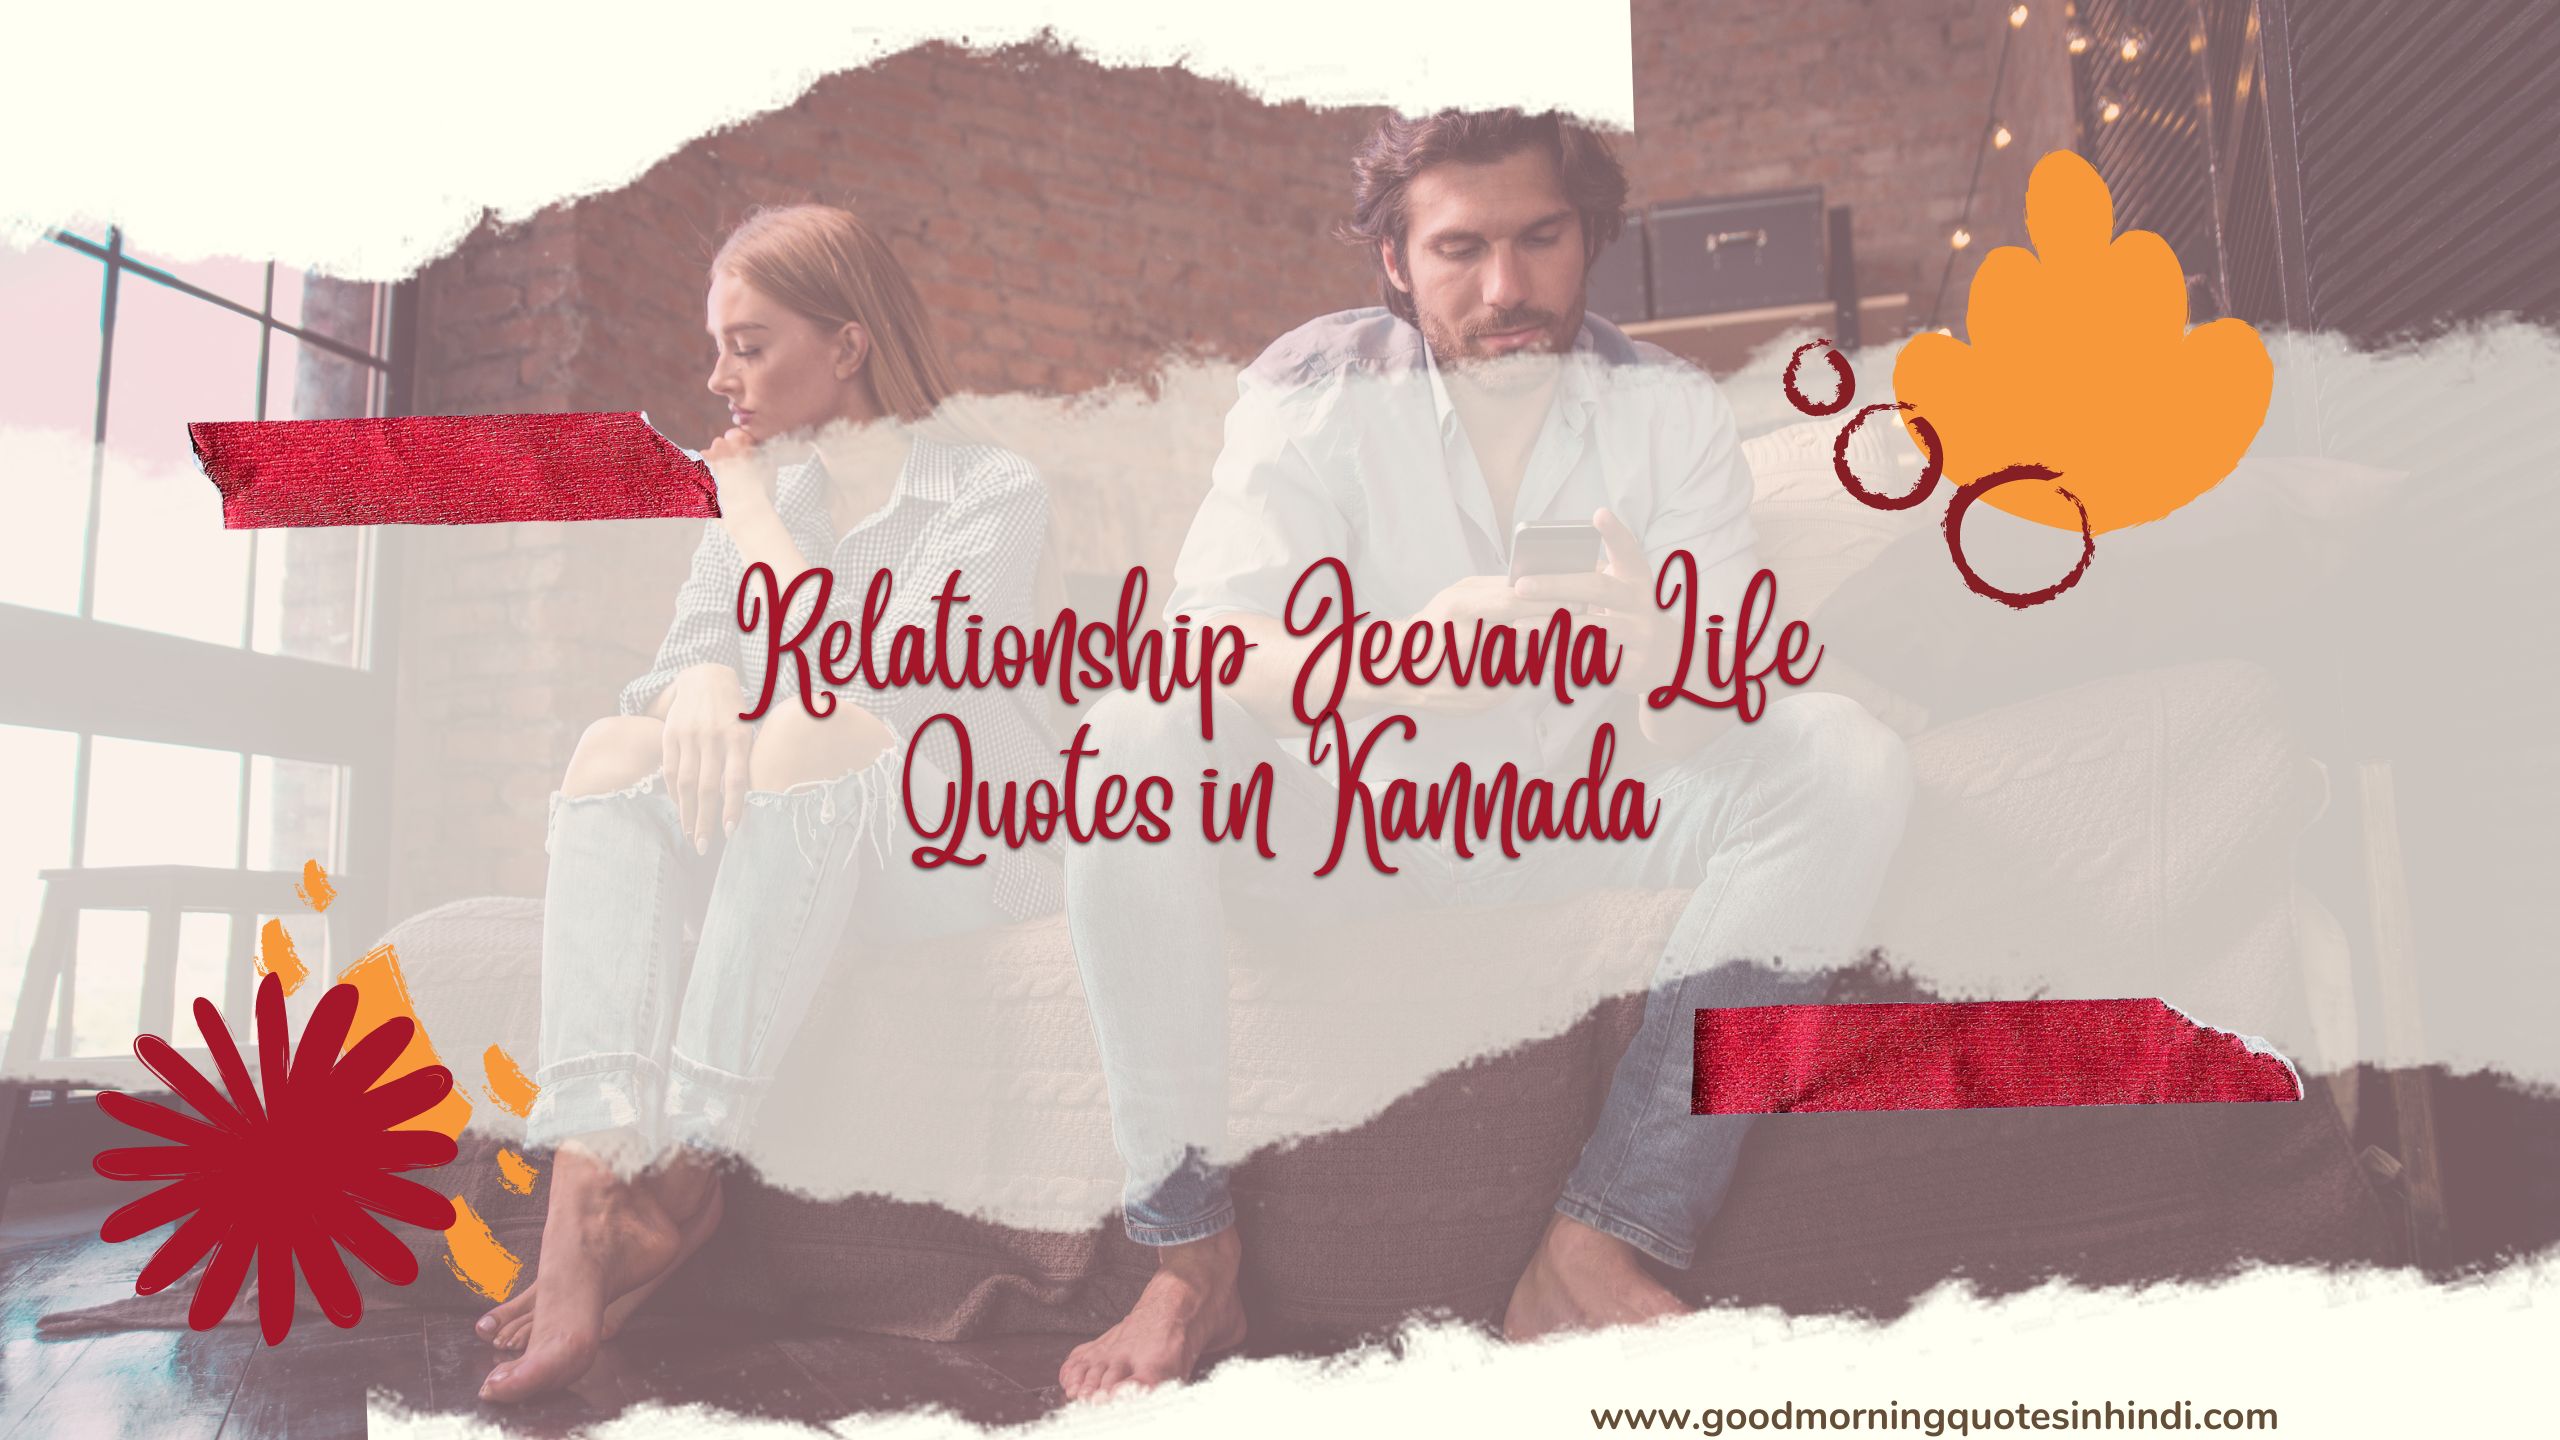 Relationship Jeevana Life Quotes in Kannada